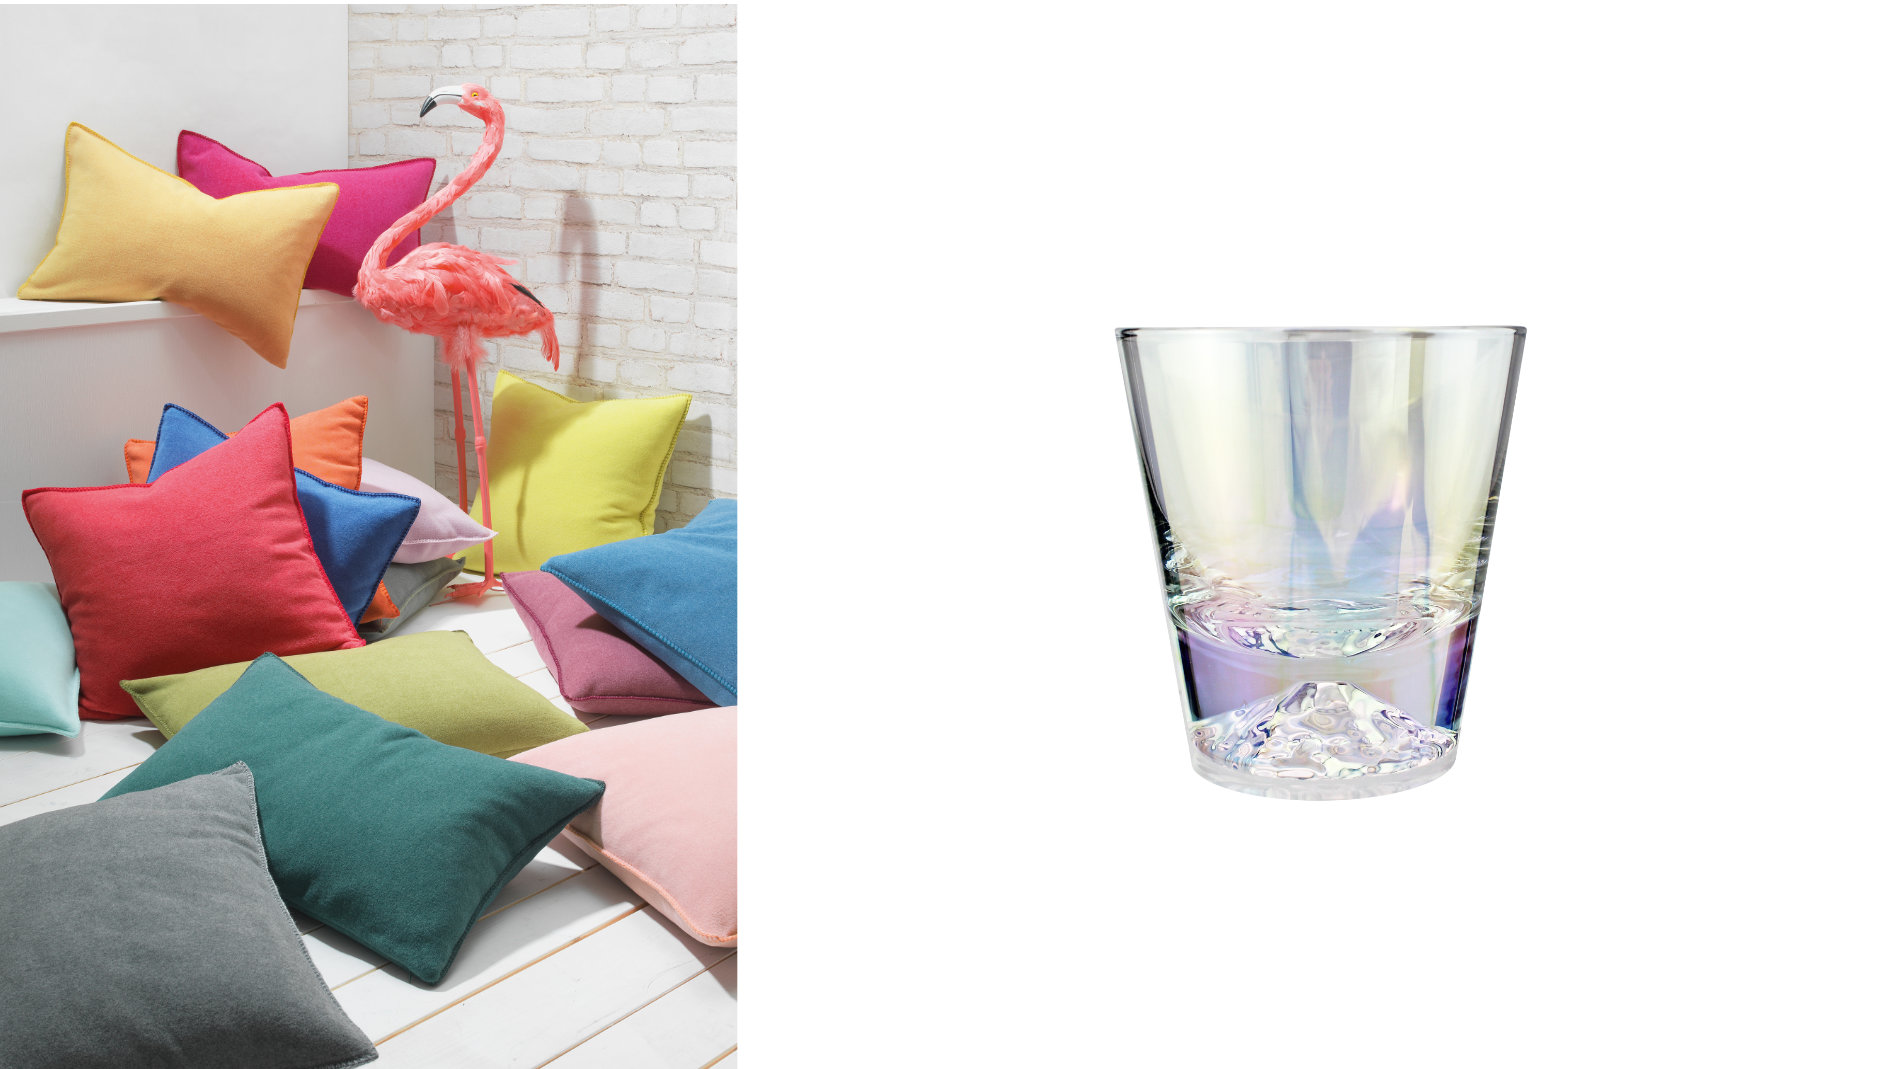 Setting festive accents: the colourful cushions by Eagle Products and the shimmering "Everest" whiskey glass by Mags. Photos: Eagle Products and Mags.